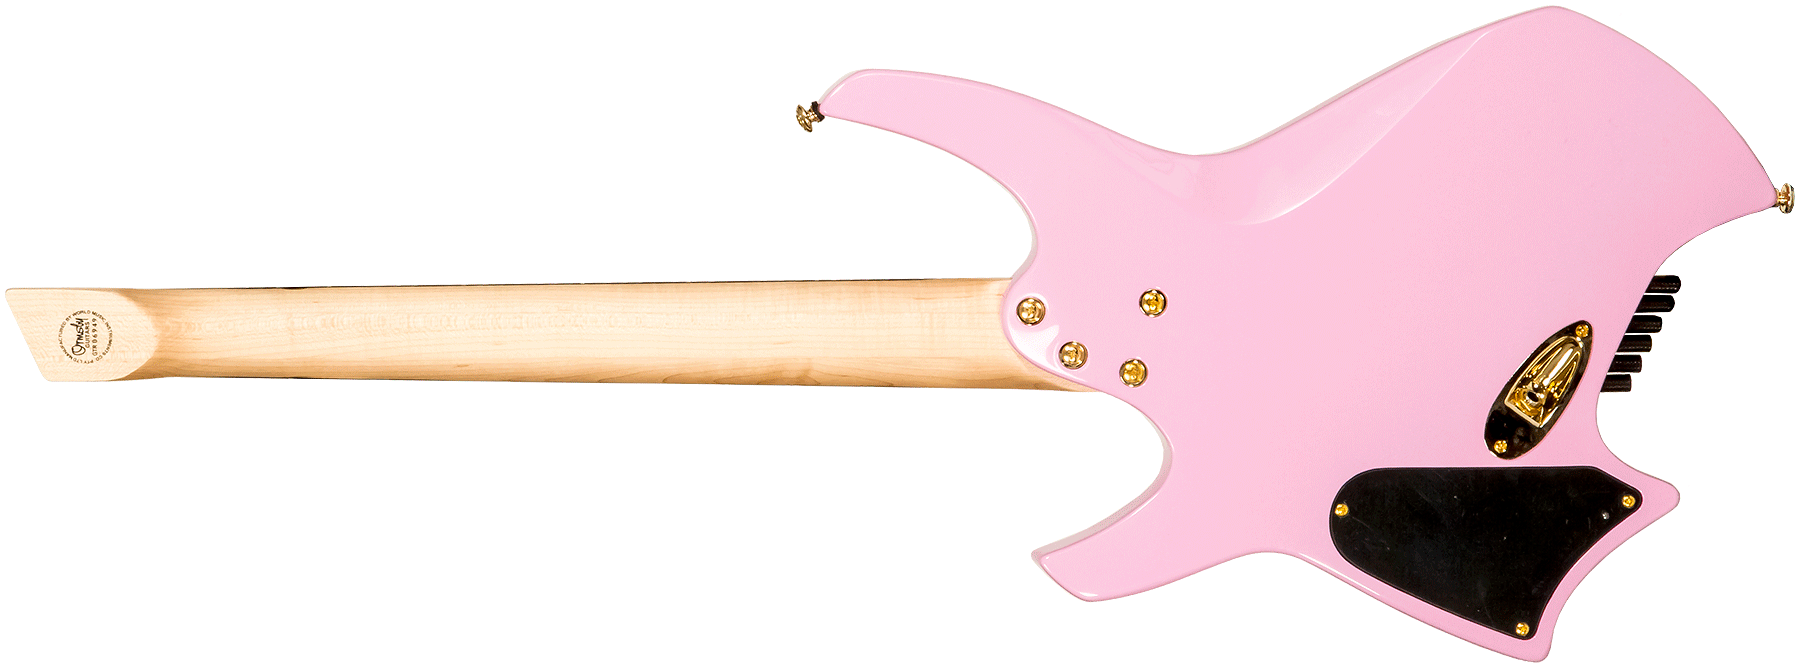 Ormsby Goliath Headless Gtr Run 14c Multiscale 2h Ht Eb - Shell Pink - Multi-Scale Guitar - Variation 7